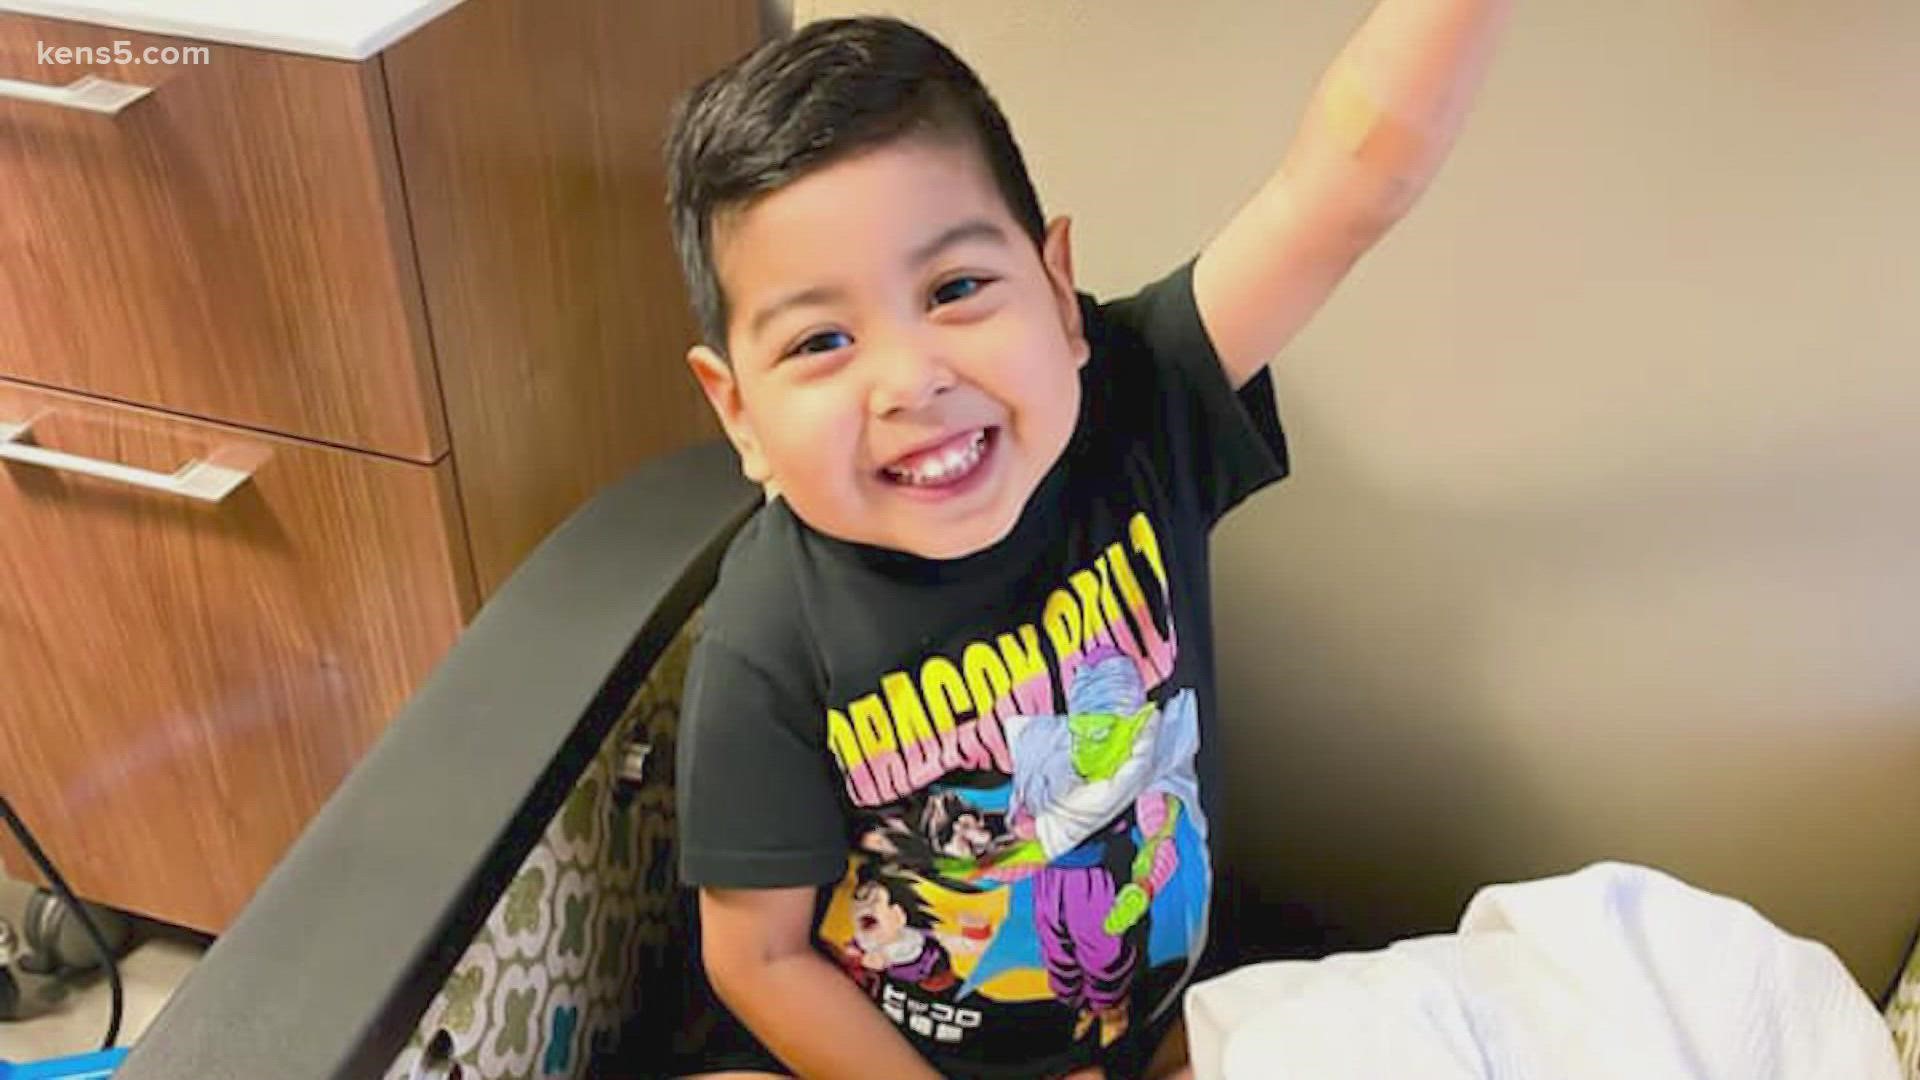 Just two days after he was born, young Josiah Aguinaga was diagnosed with a genetic disorder affecting his kidneys and liver.